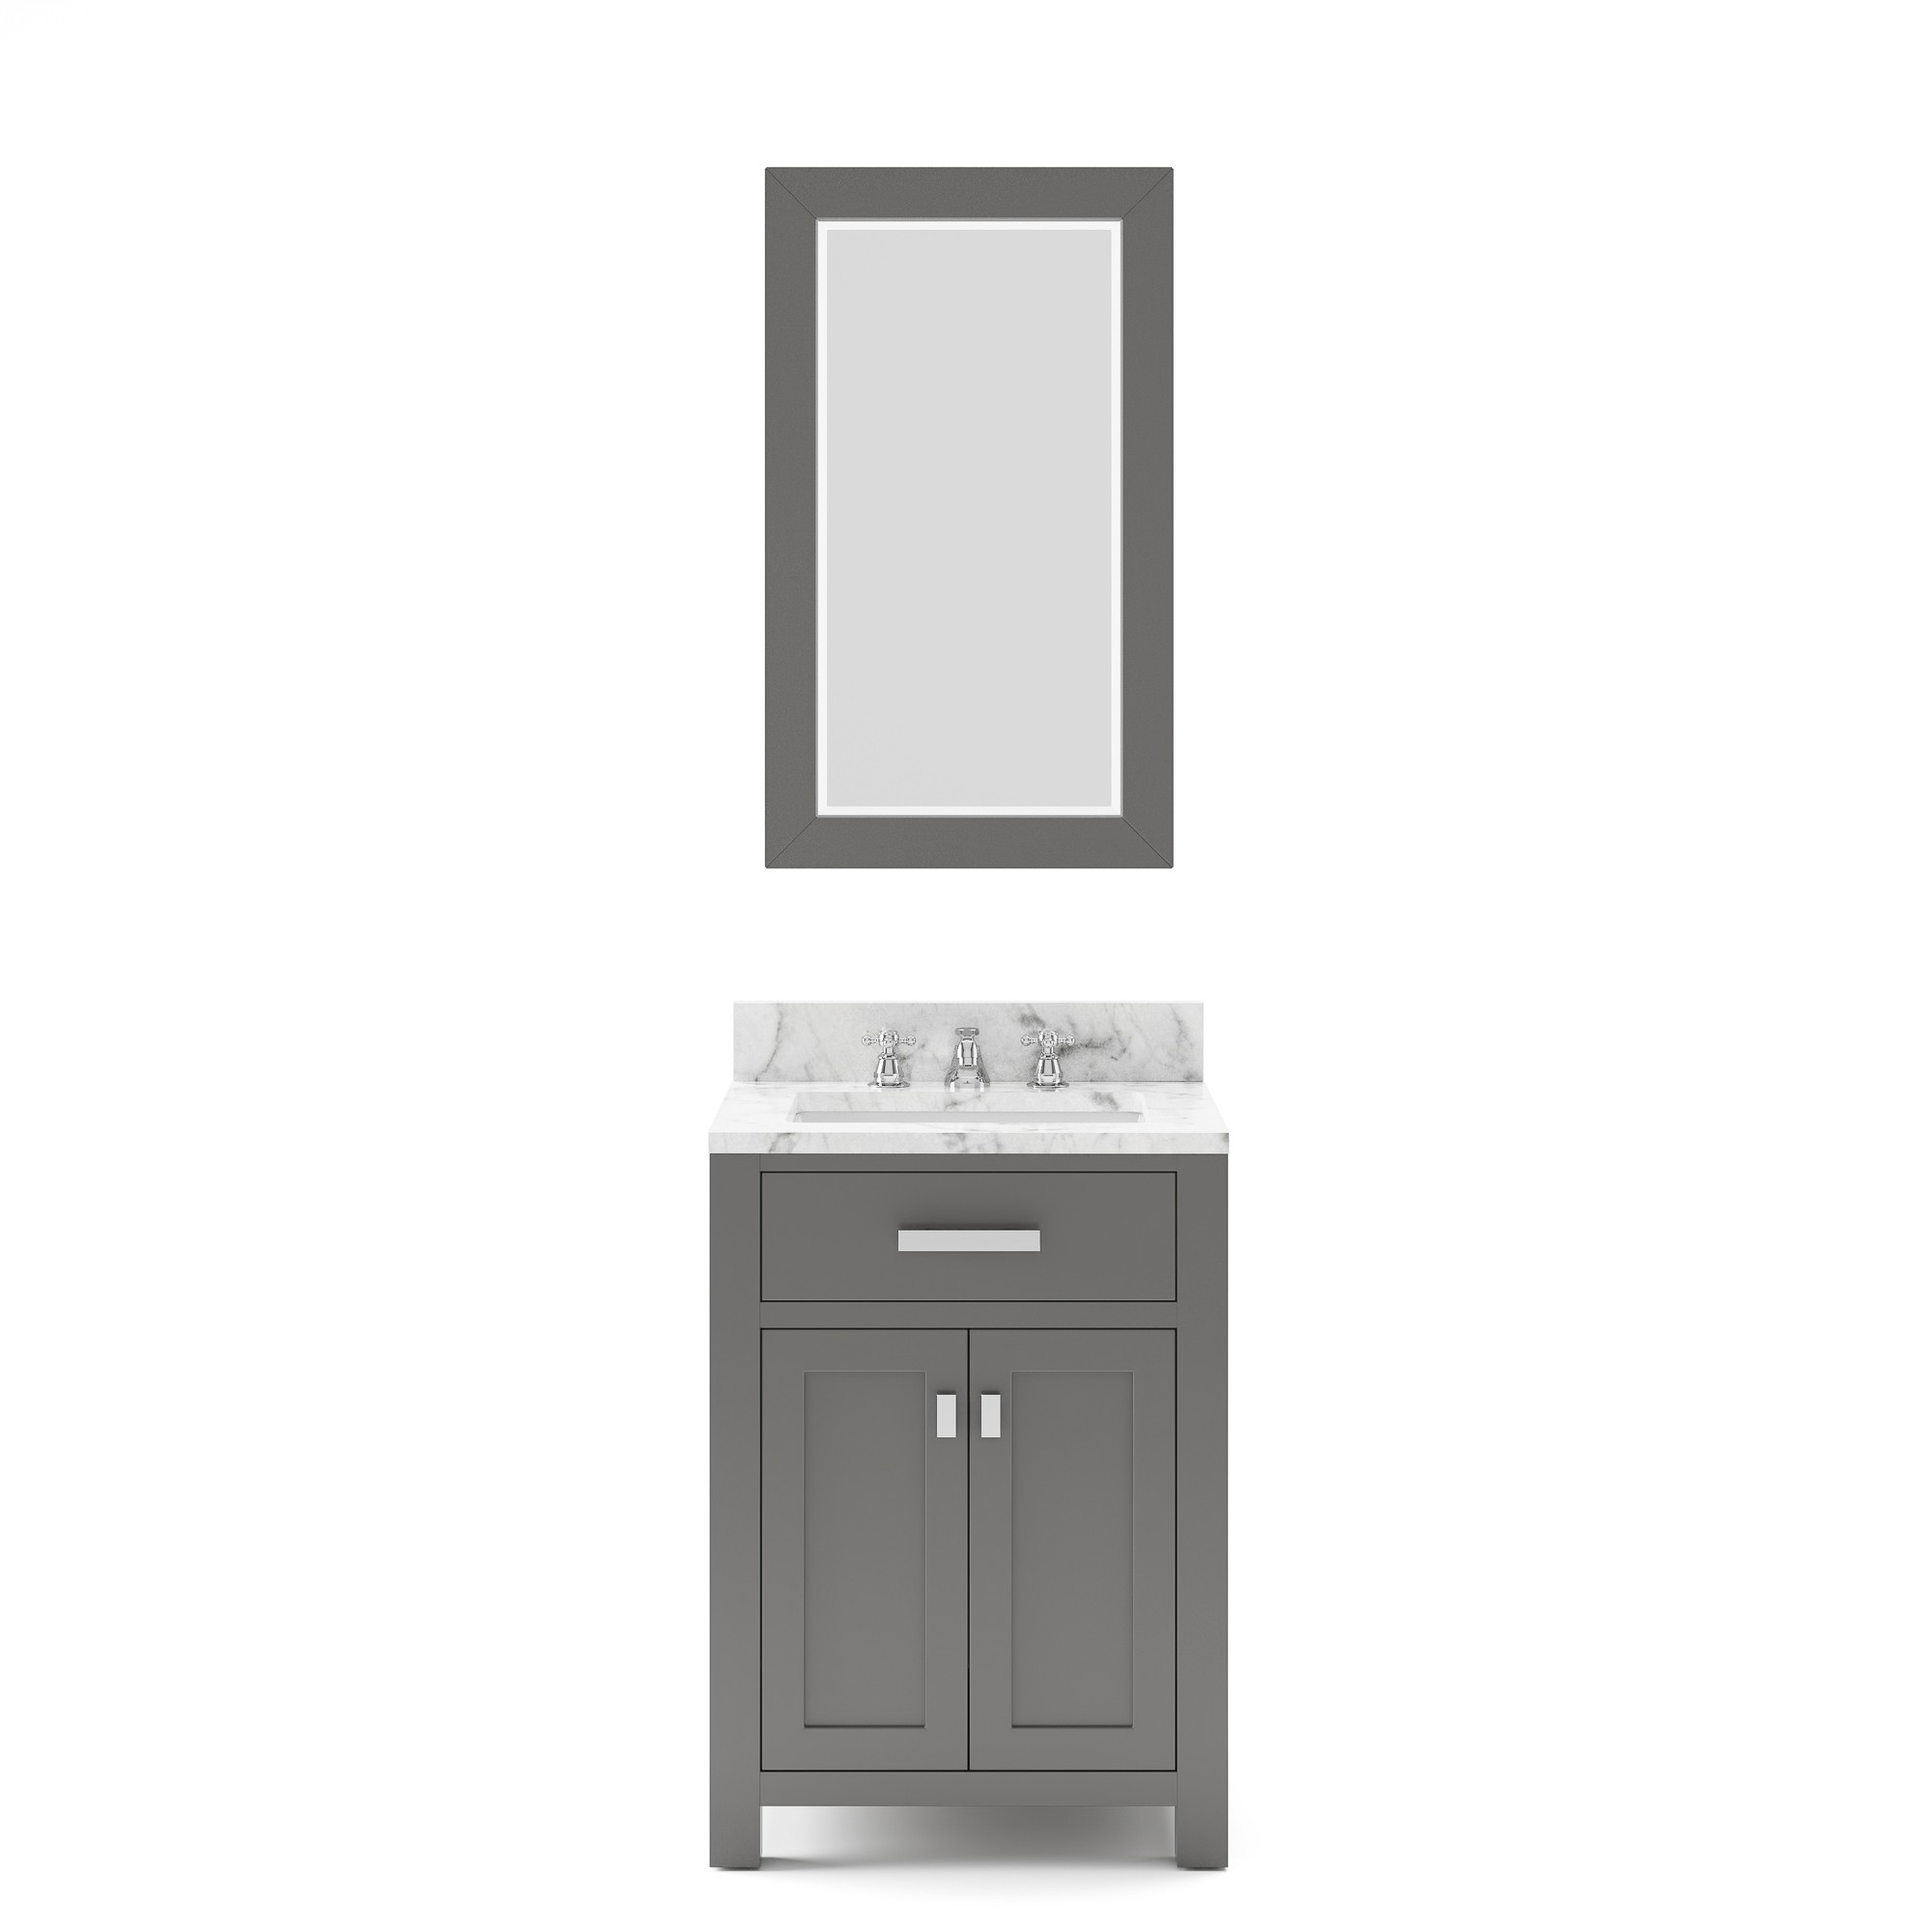 WATER-CREATION MS24CW01CG-R21000000 MADISON 24 INCH CASHMERE GREY SINGLE SINK BATHROOM VANITY WITH MATCHING FRAMED MIRROR